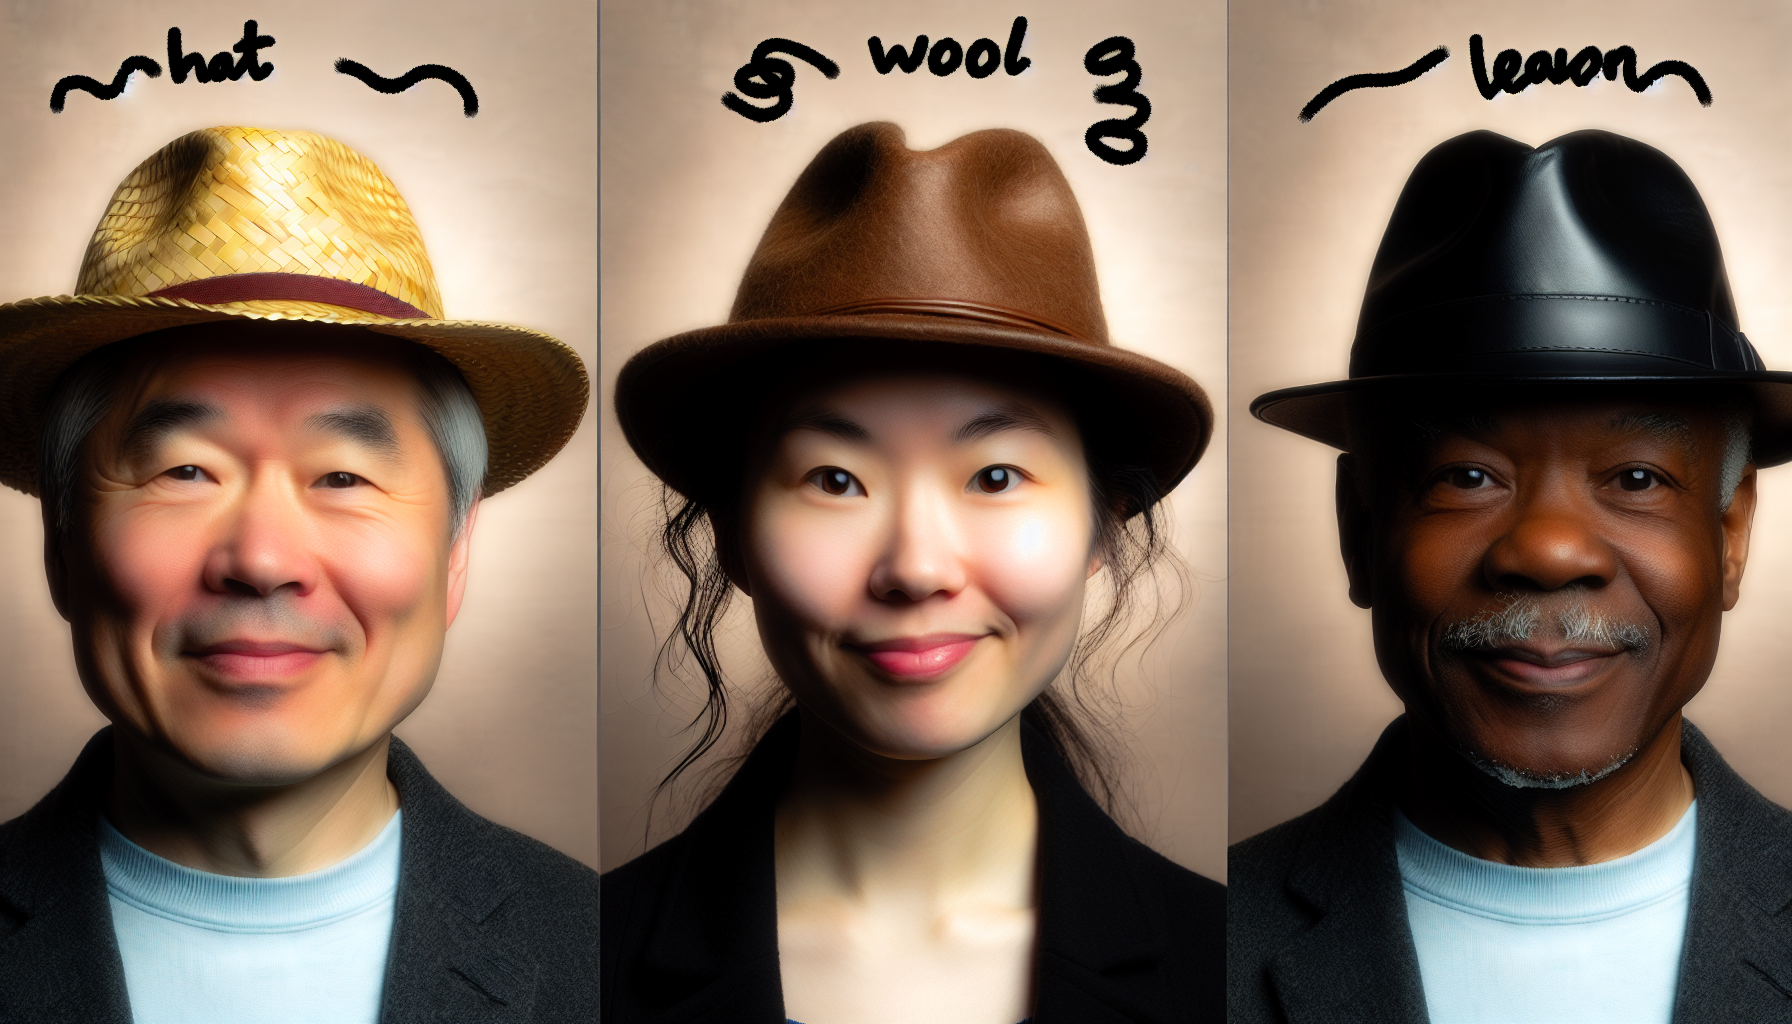 Comparison of hat materials: straw, wool felt, and leather